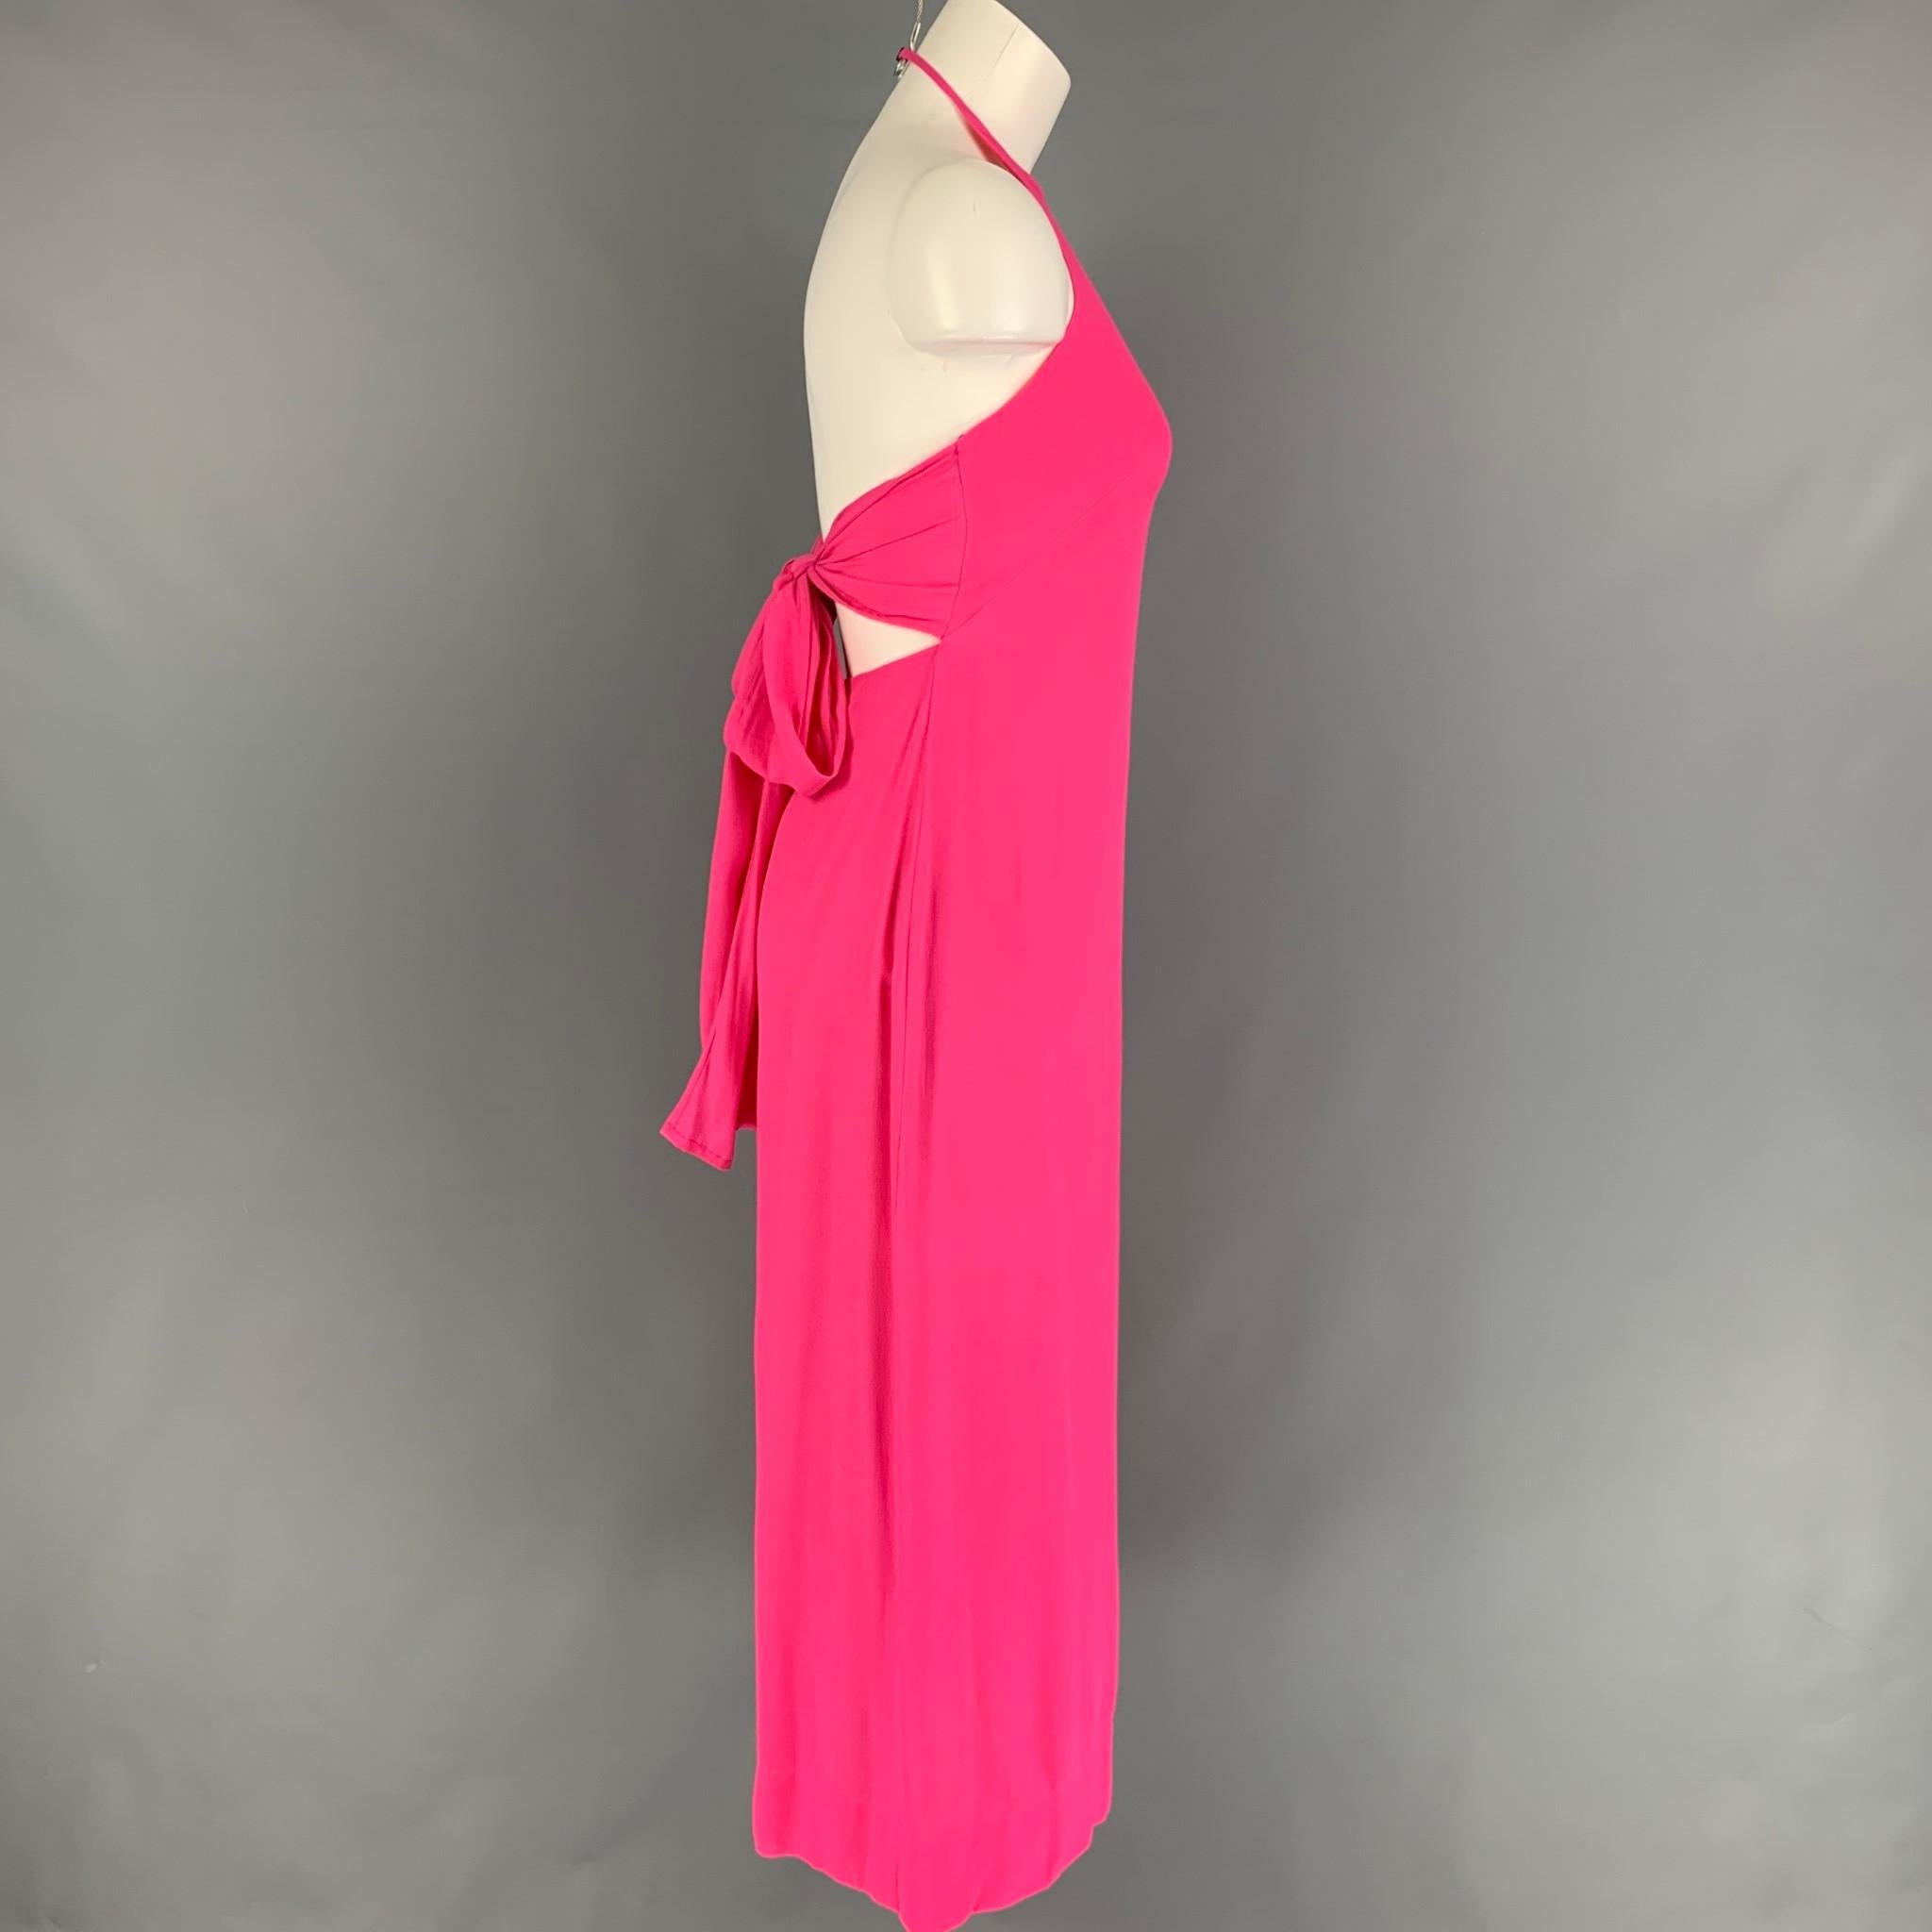 THREE GRACES dress comes in a pink viscose featuring a shift style, halter detail, back self tie bow, back slit, and a back zip up closure. 

New With Tags.
Marked: 6
Original Retail Price: $1,040.00

Measurements:

Bust: 28 in.
Hip: 36 in.
Length: